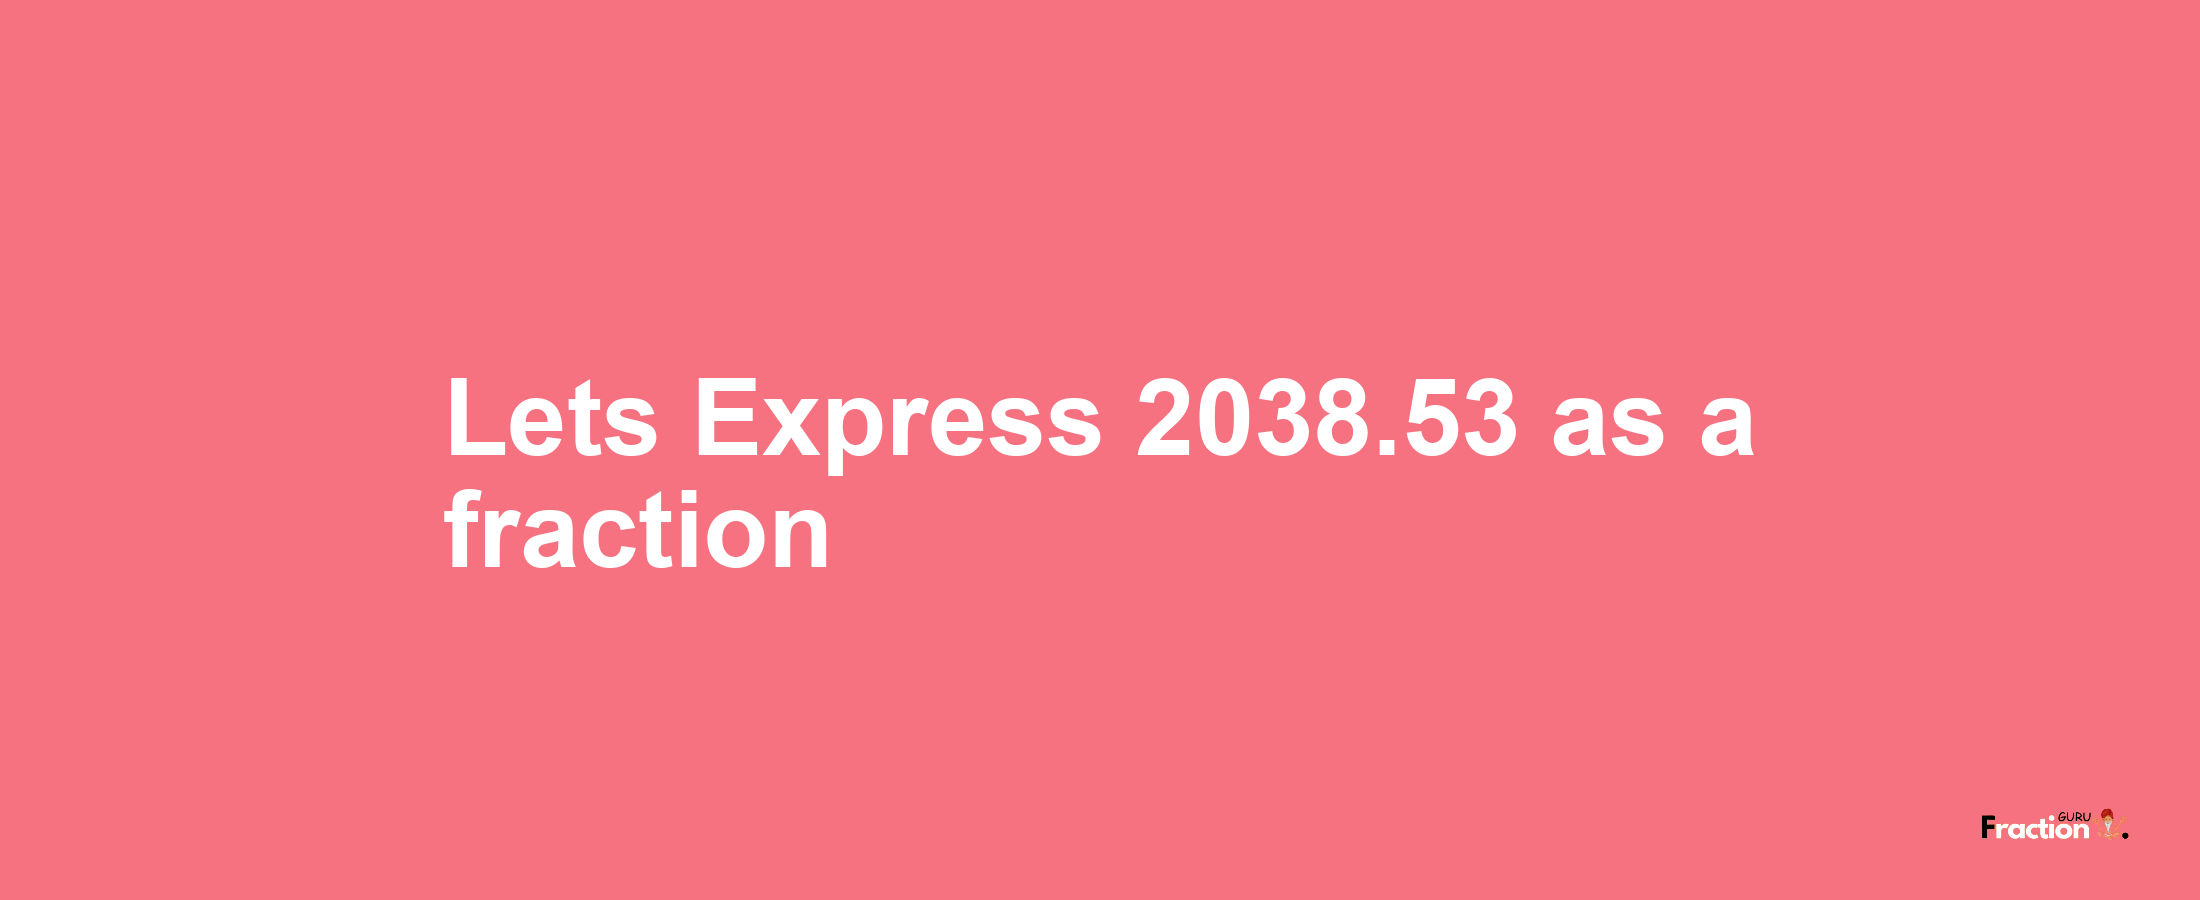 Lets Express 2038.53 as afraction